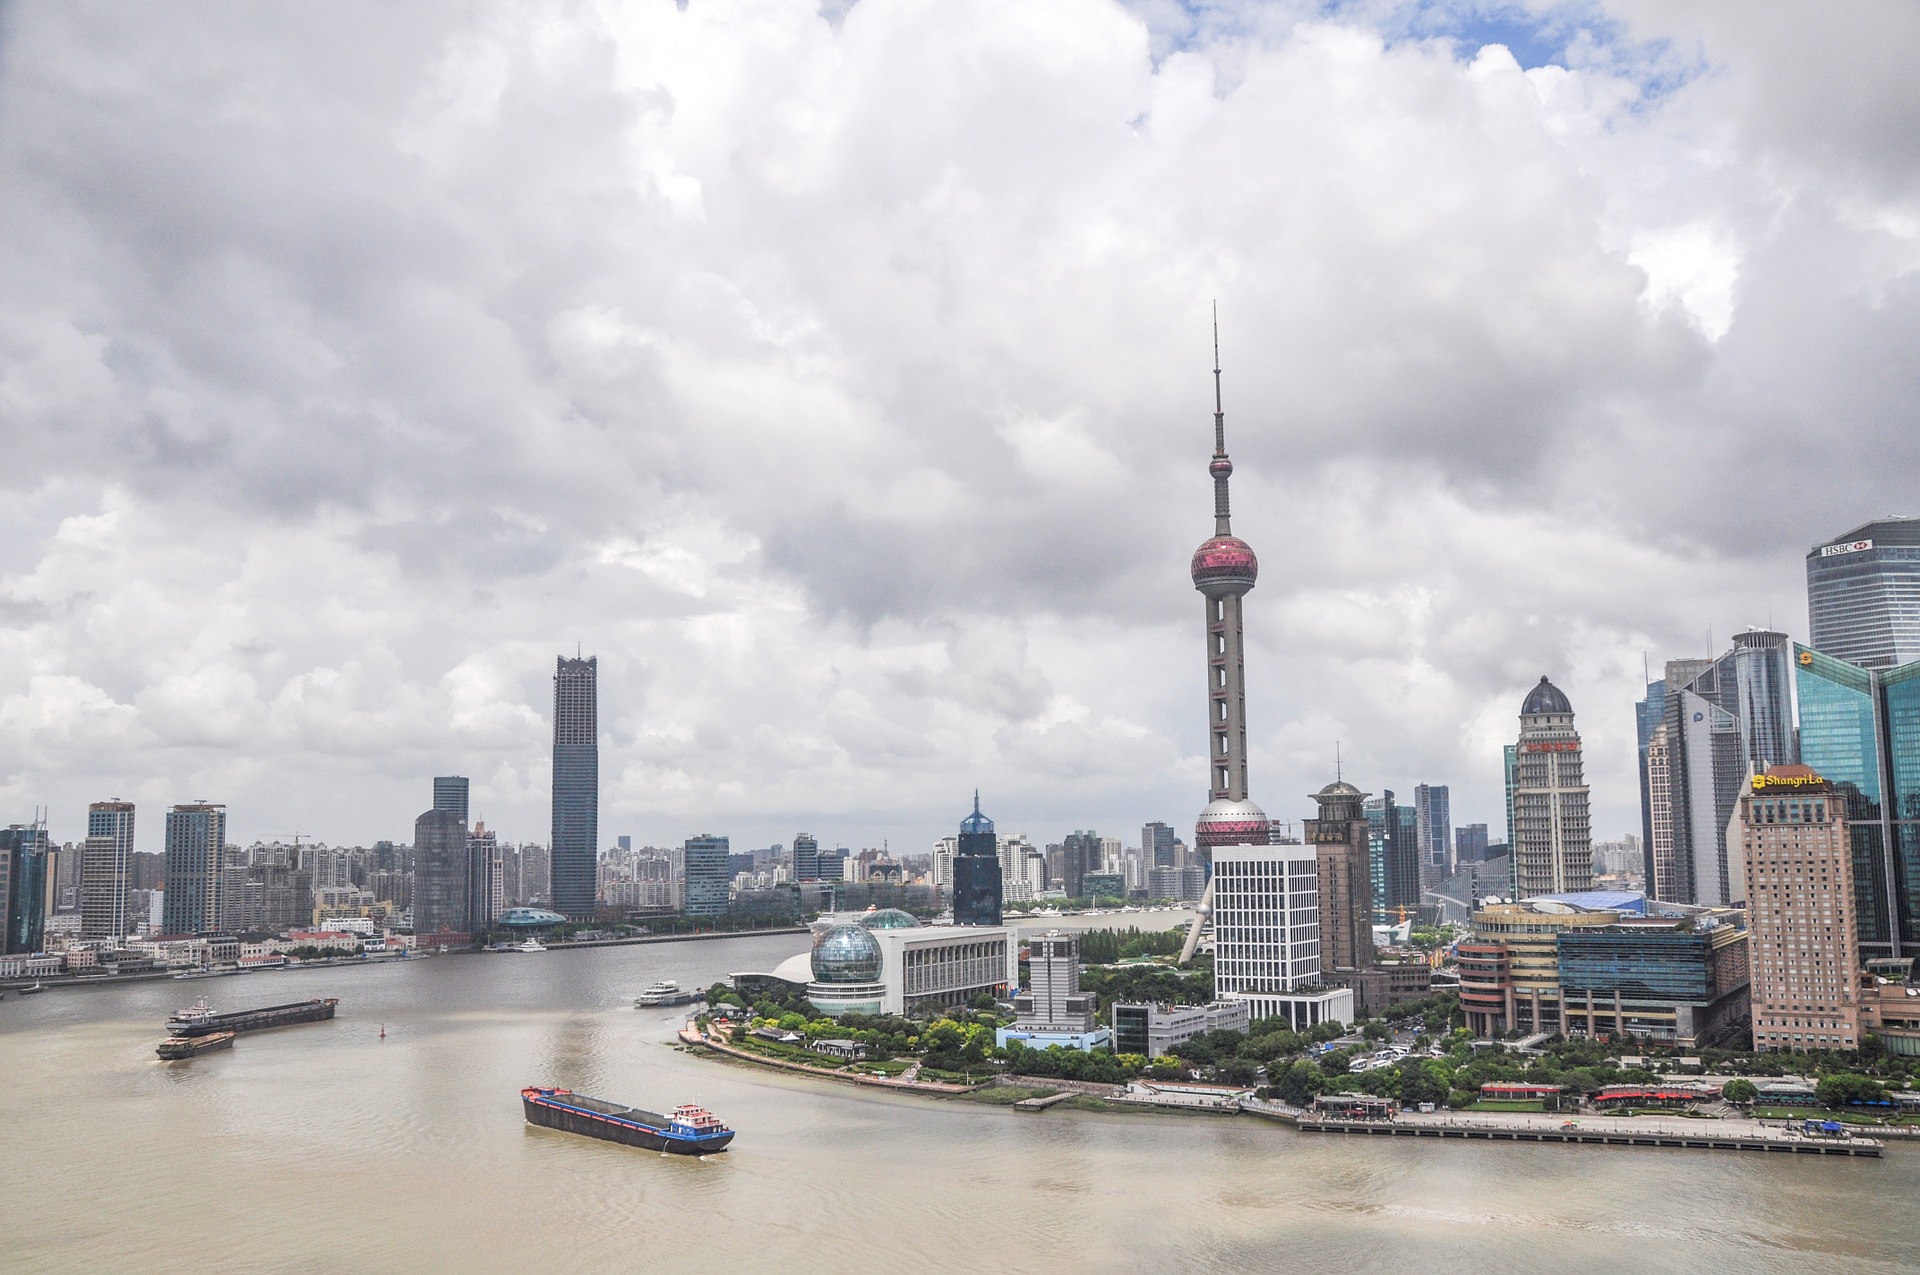 Day Translations Opens It’s First Office in Shanghai, China